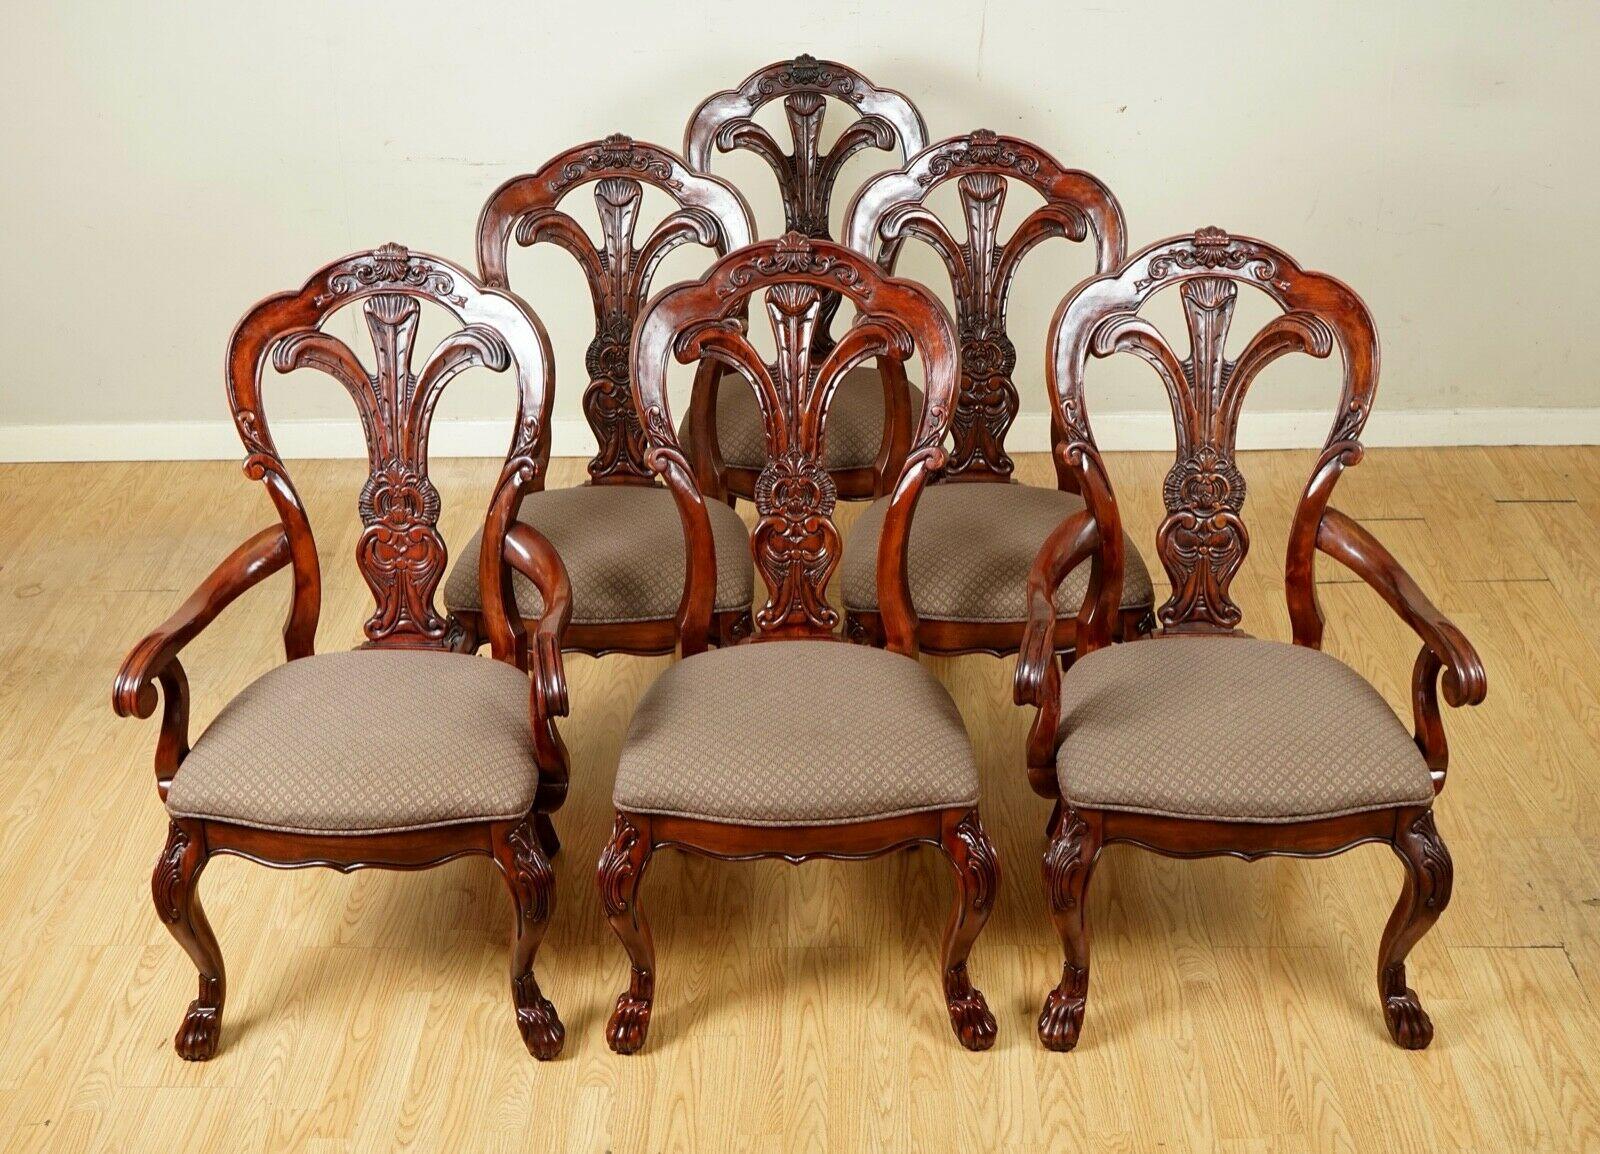 We are delighted to sell these stunning mahogany dining chairs.

Bernhardt Furniture is an American company, established over 125 years. They are among the country's largest family-owned furniture companies and a leading diversified global